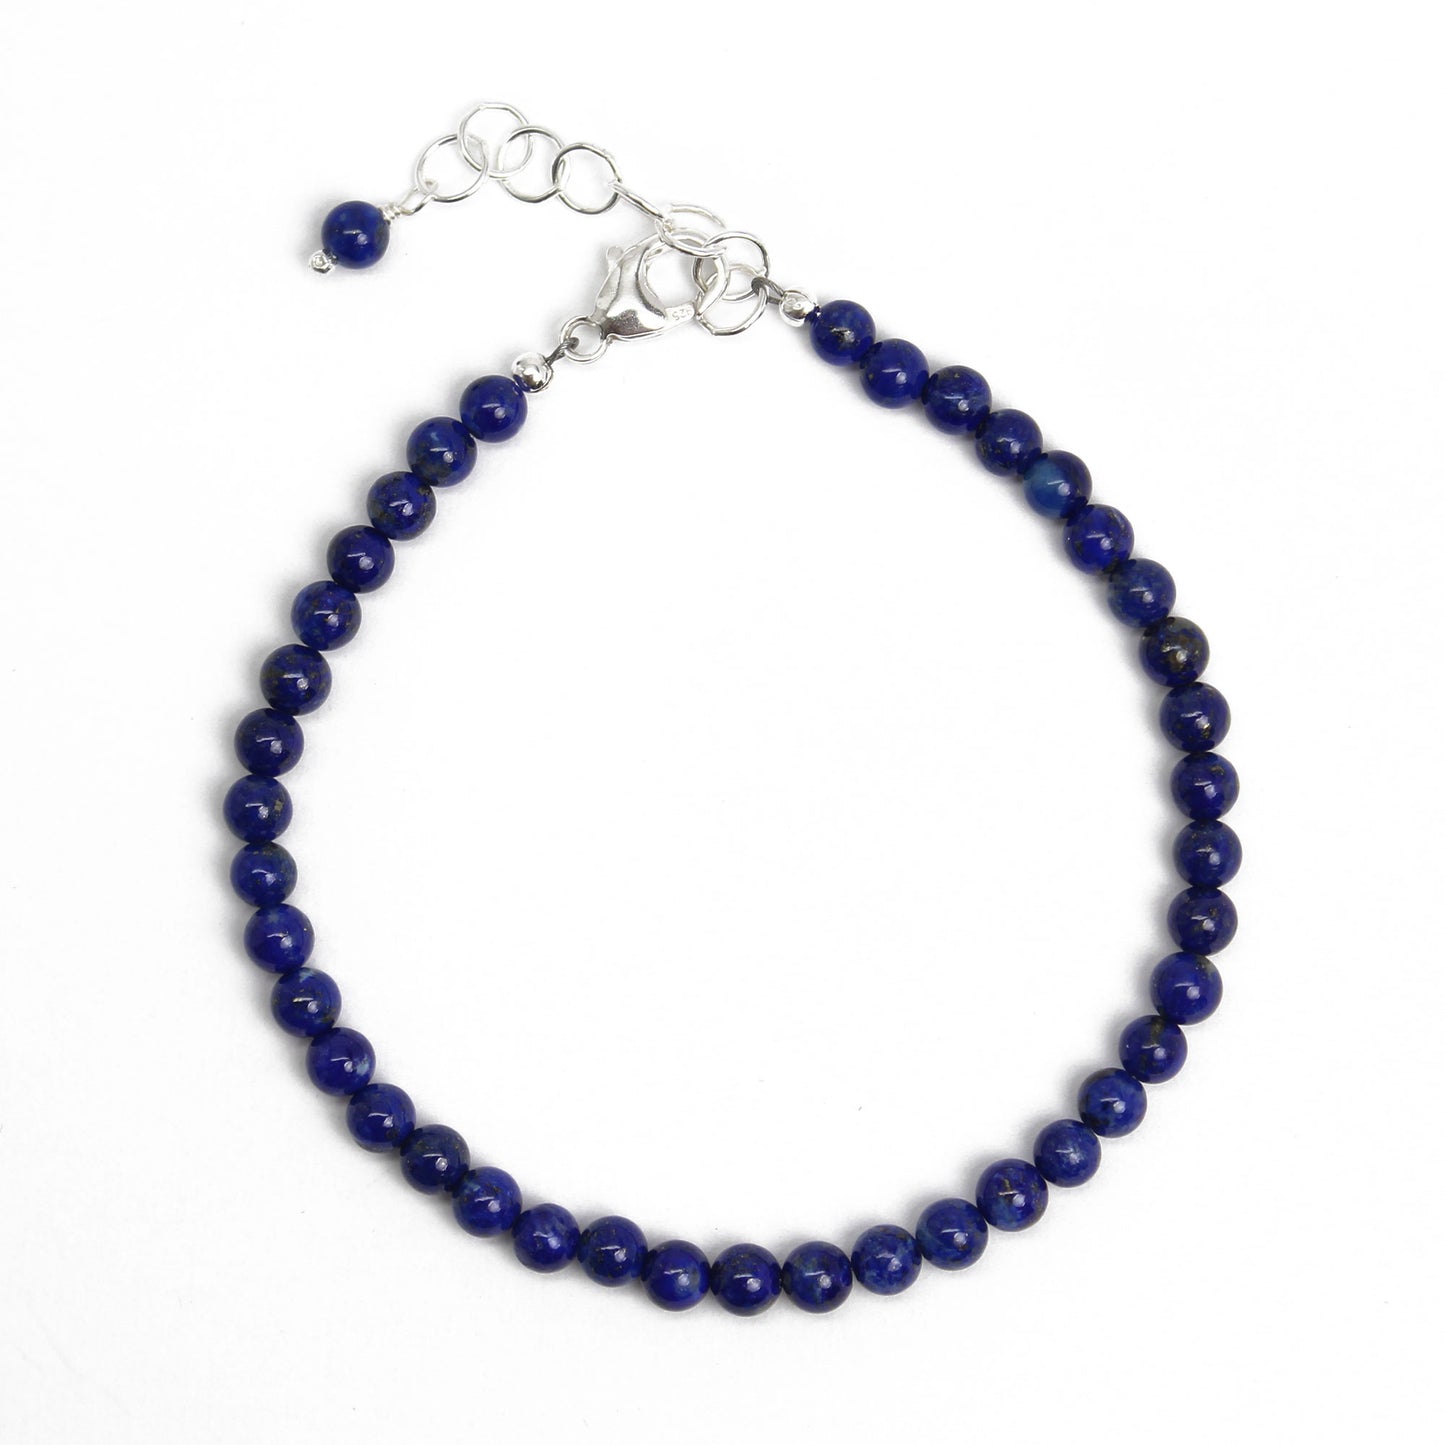 Lapis Lazuli Necklace, 4mm Beads, Sterling Silver Clasp 26 / 14/20 Gold Filled